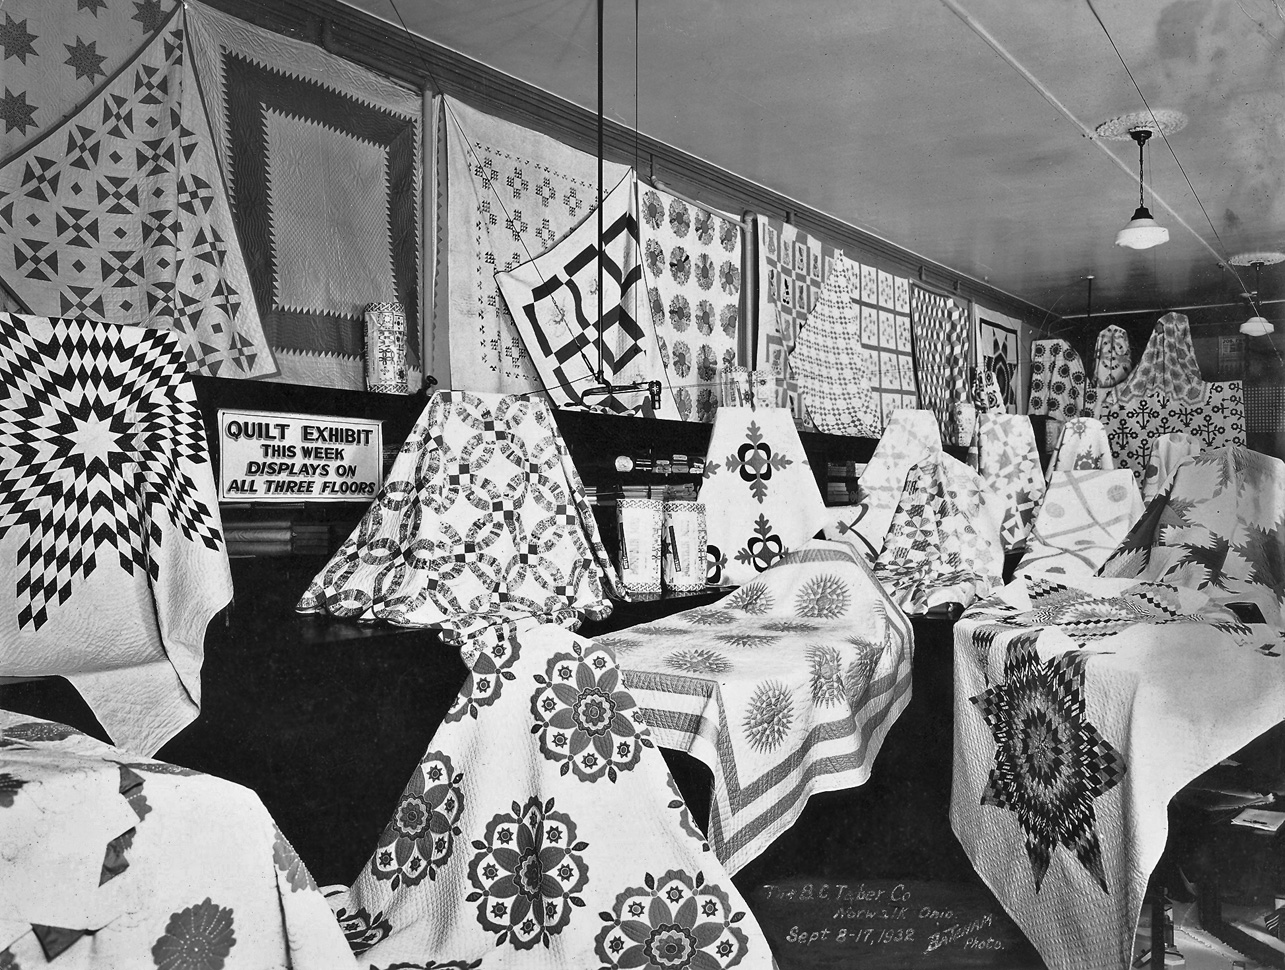 My grandfather managed the B.C. Taber department store in Norwalk, Ohio during the Depression. This is one of his displays, showing a sale on quilts from September 8th-17th, 1932. View full size.